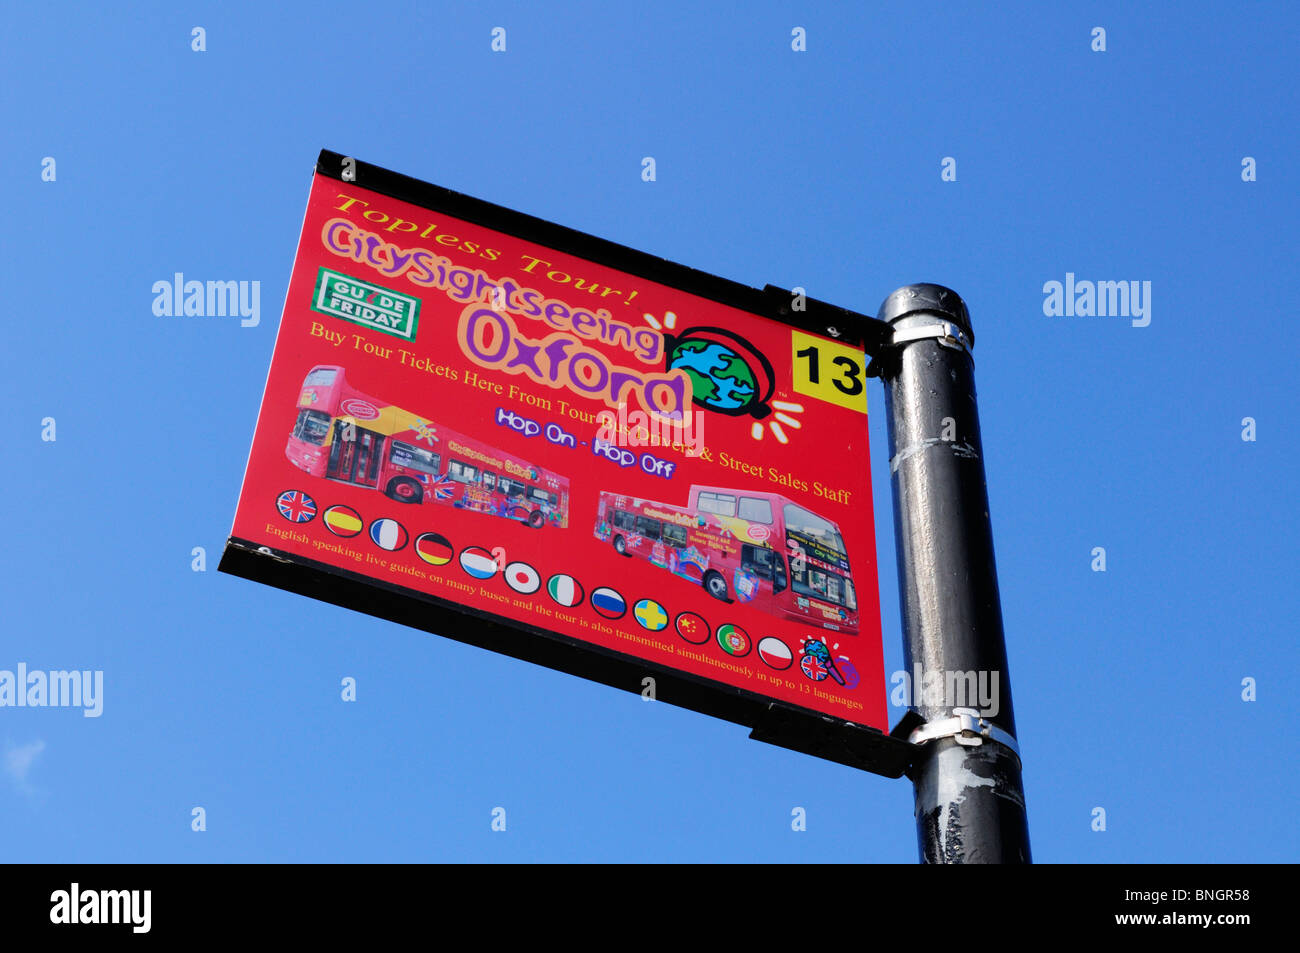 Oxford City sightseeing bus stop sign against a blue sky, Oxford, England, UK Banque D'Images